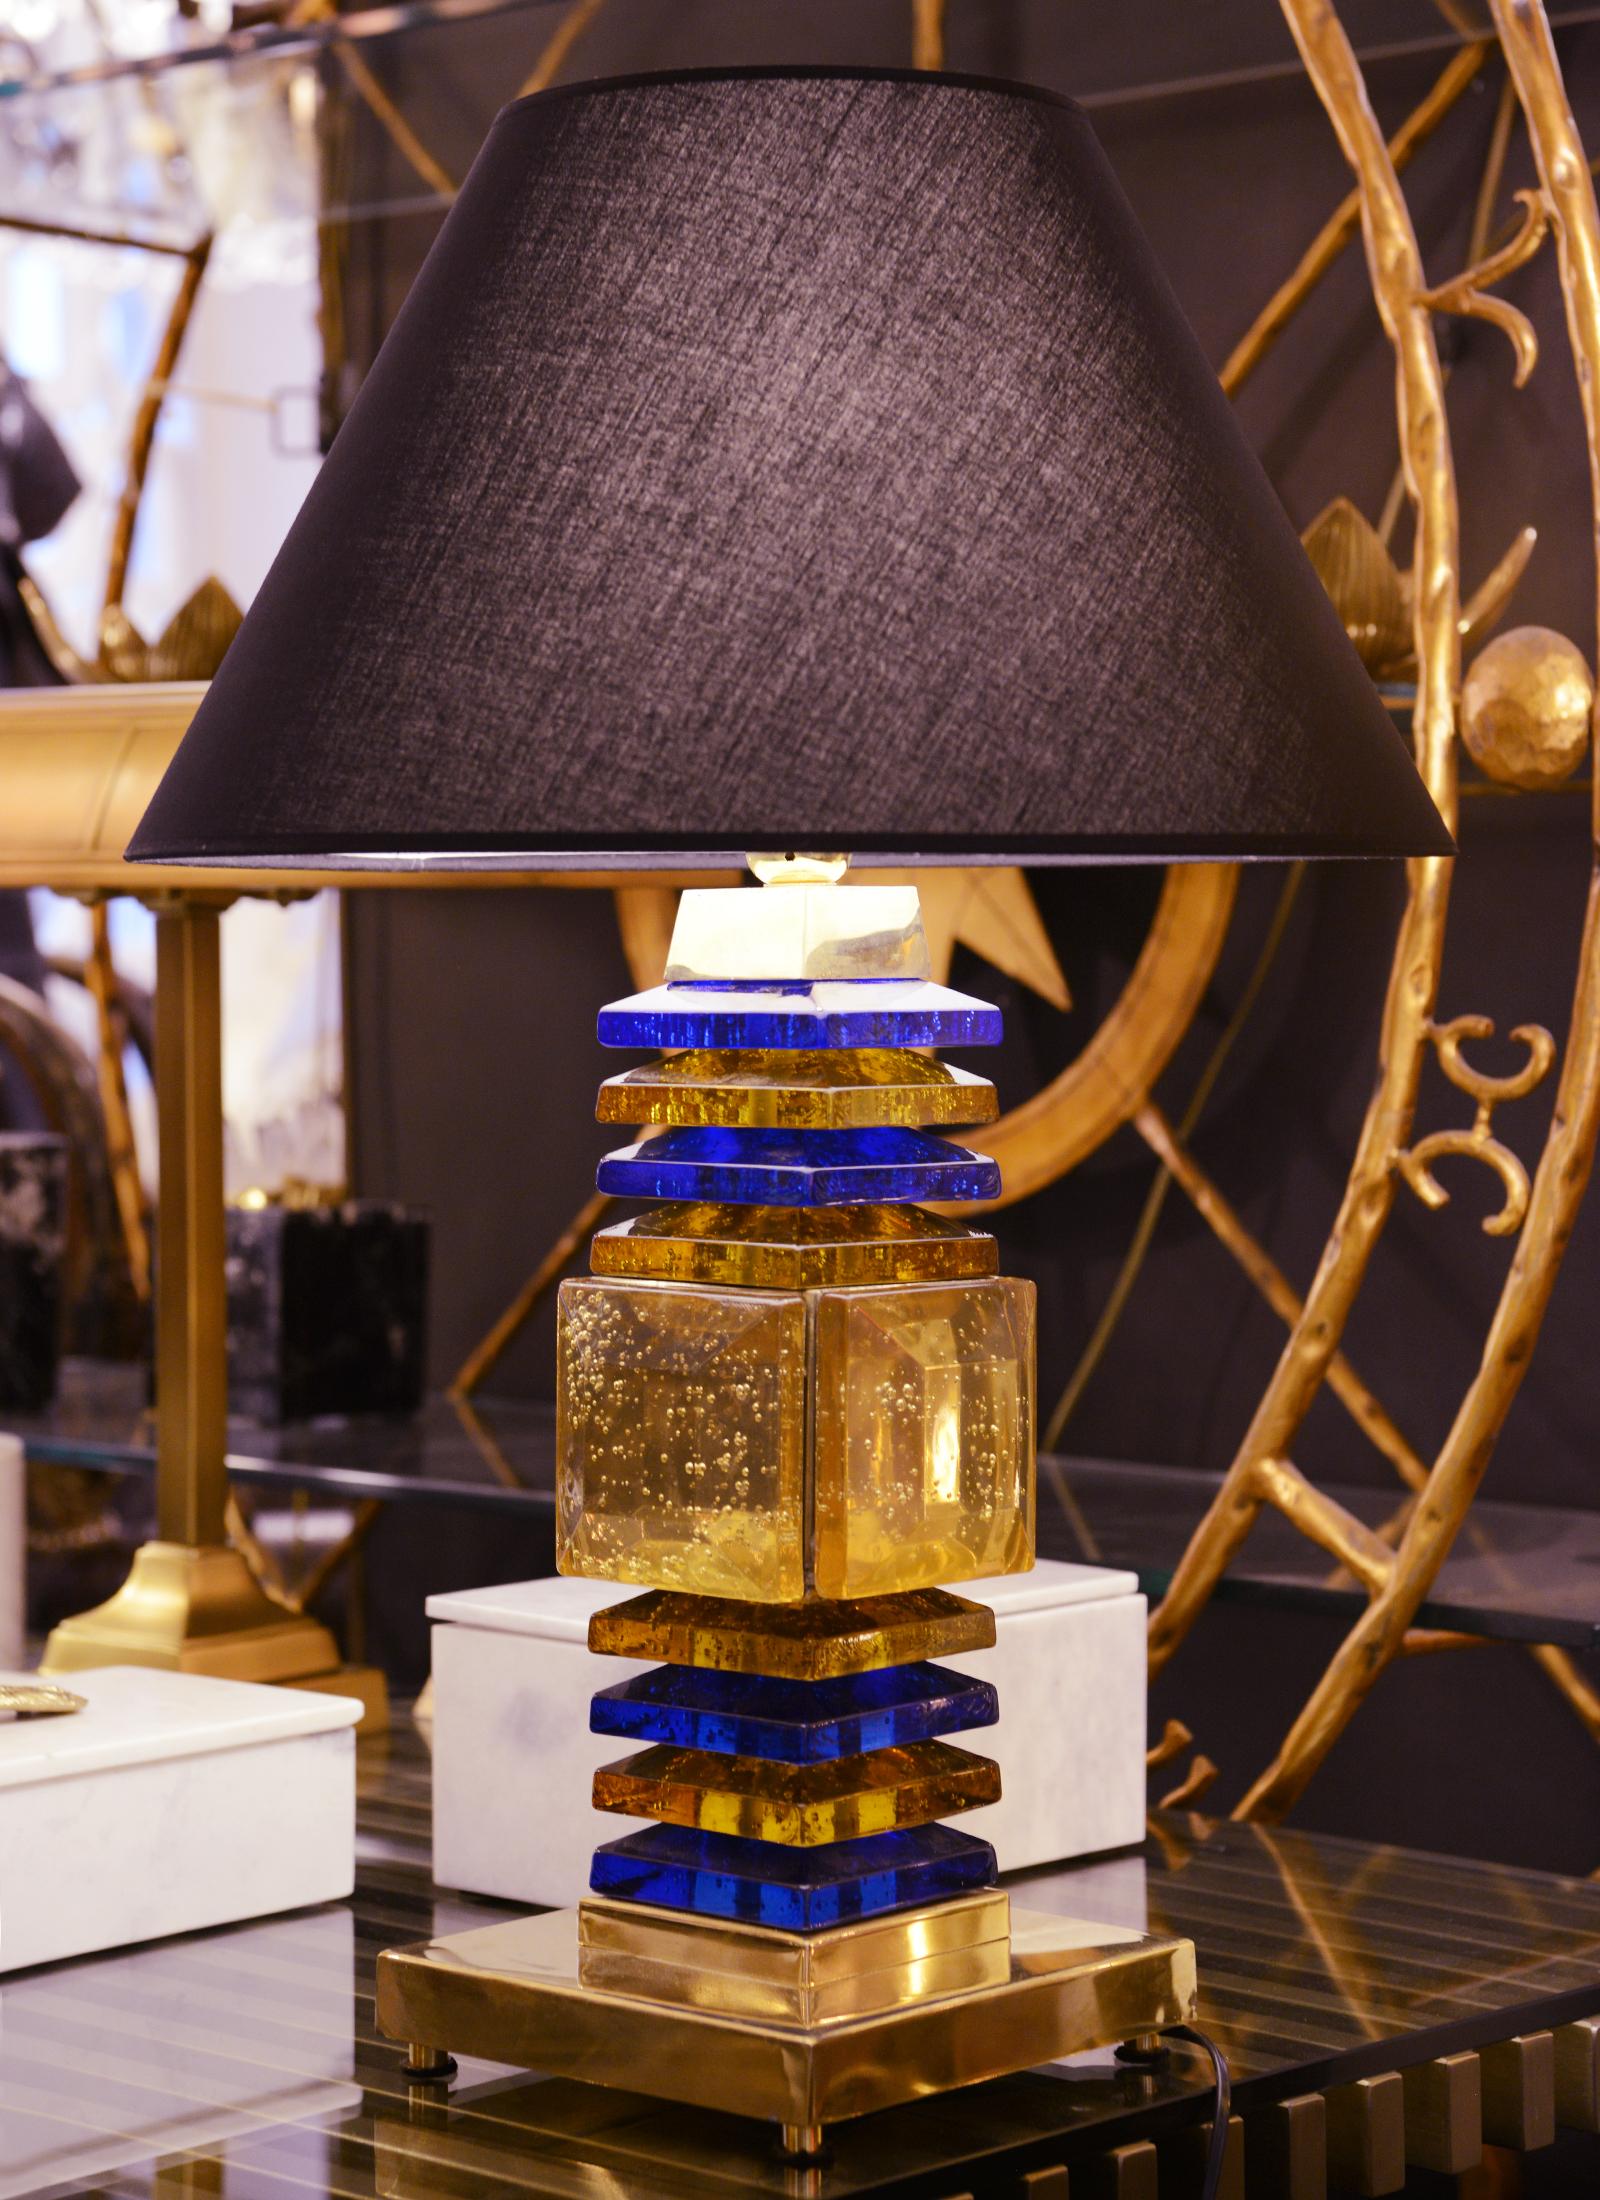 Table Lamp Gold'n Blue Murano Set of 2 with polished
brushed brass base table lamp ornamented with murano
glass in blue and gold finish.
With black lamp shade included: Diameter 45cm.
Table lamp base: L20xD20cm
Table lamp body: